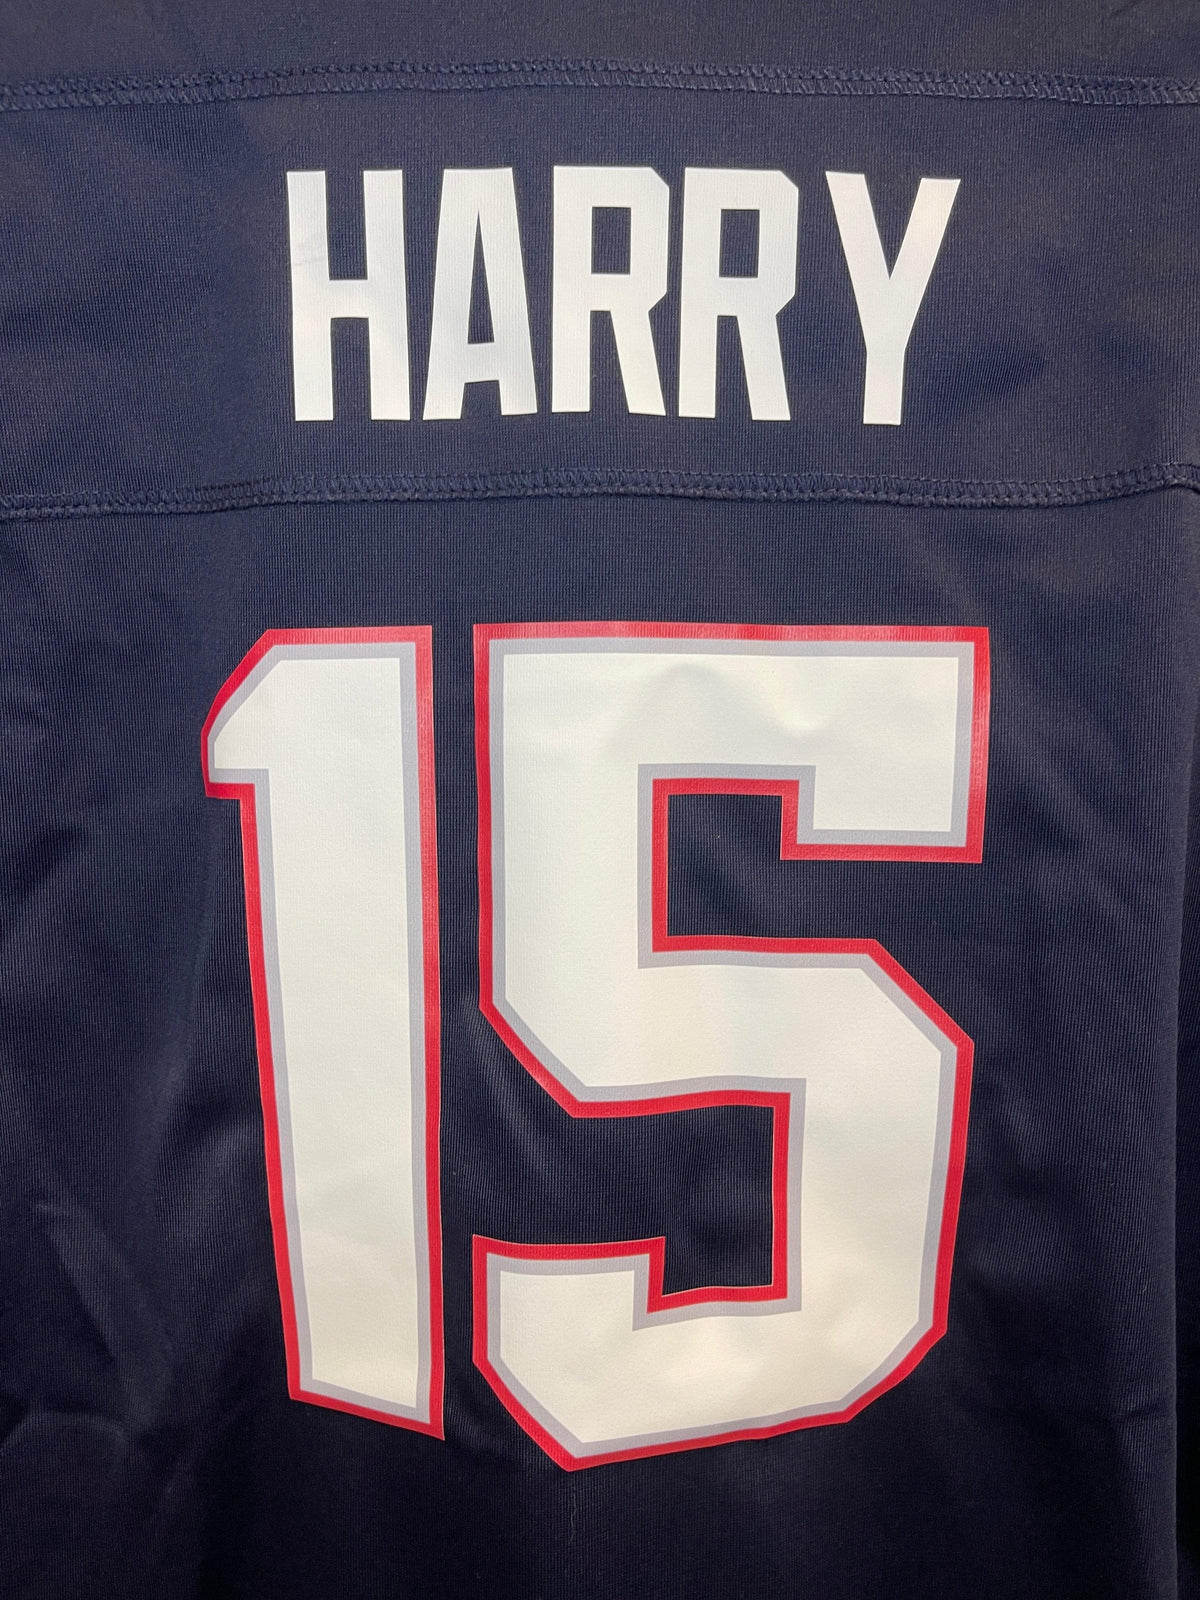 NFL New England Patriots Harry #15 Game Jersey Youth X-Large 18-20 NWT